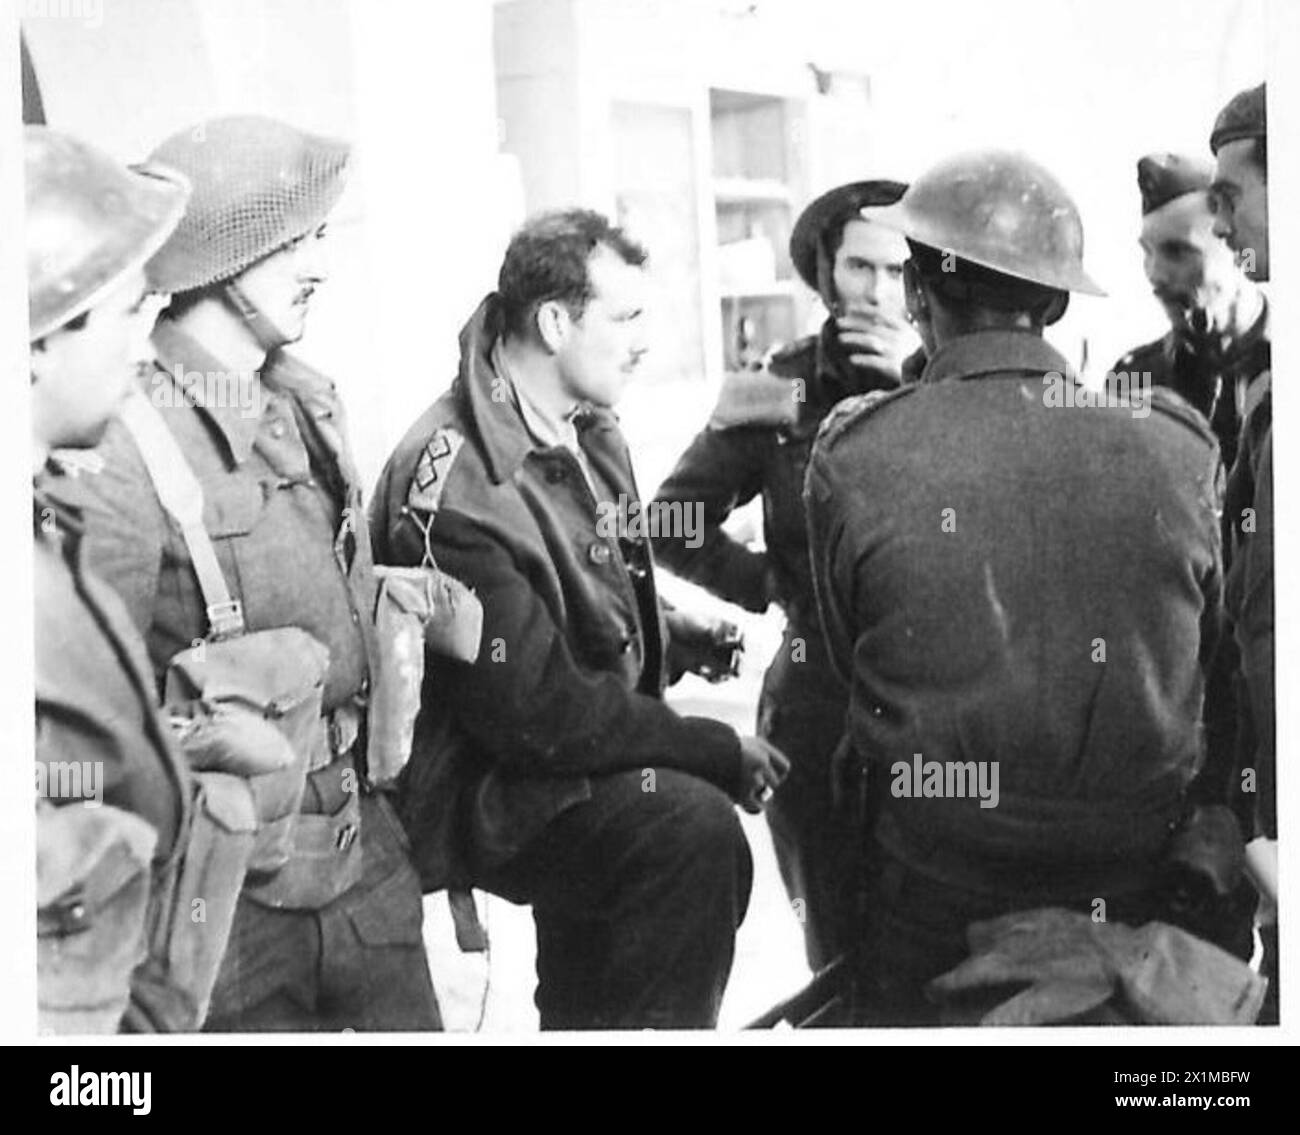 ITALY : EIGHTH ARMY ENTRY INTO ORTONA - Tank operations were held up by a mine exploding in the main streer. Lieut P.R.V. Carr-Harris of Kingston, Ontario, Royal Canadian Engineers, explains the situation to Capt. Blair of the Edmonton Regiment, British Army Stock Photo